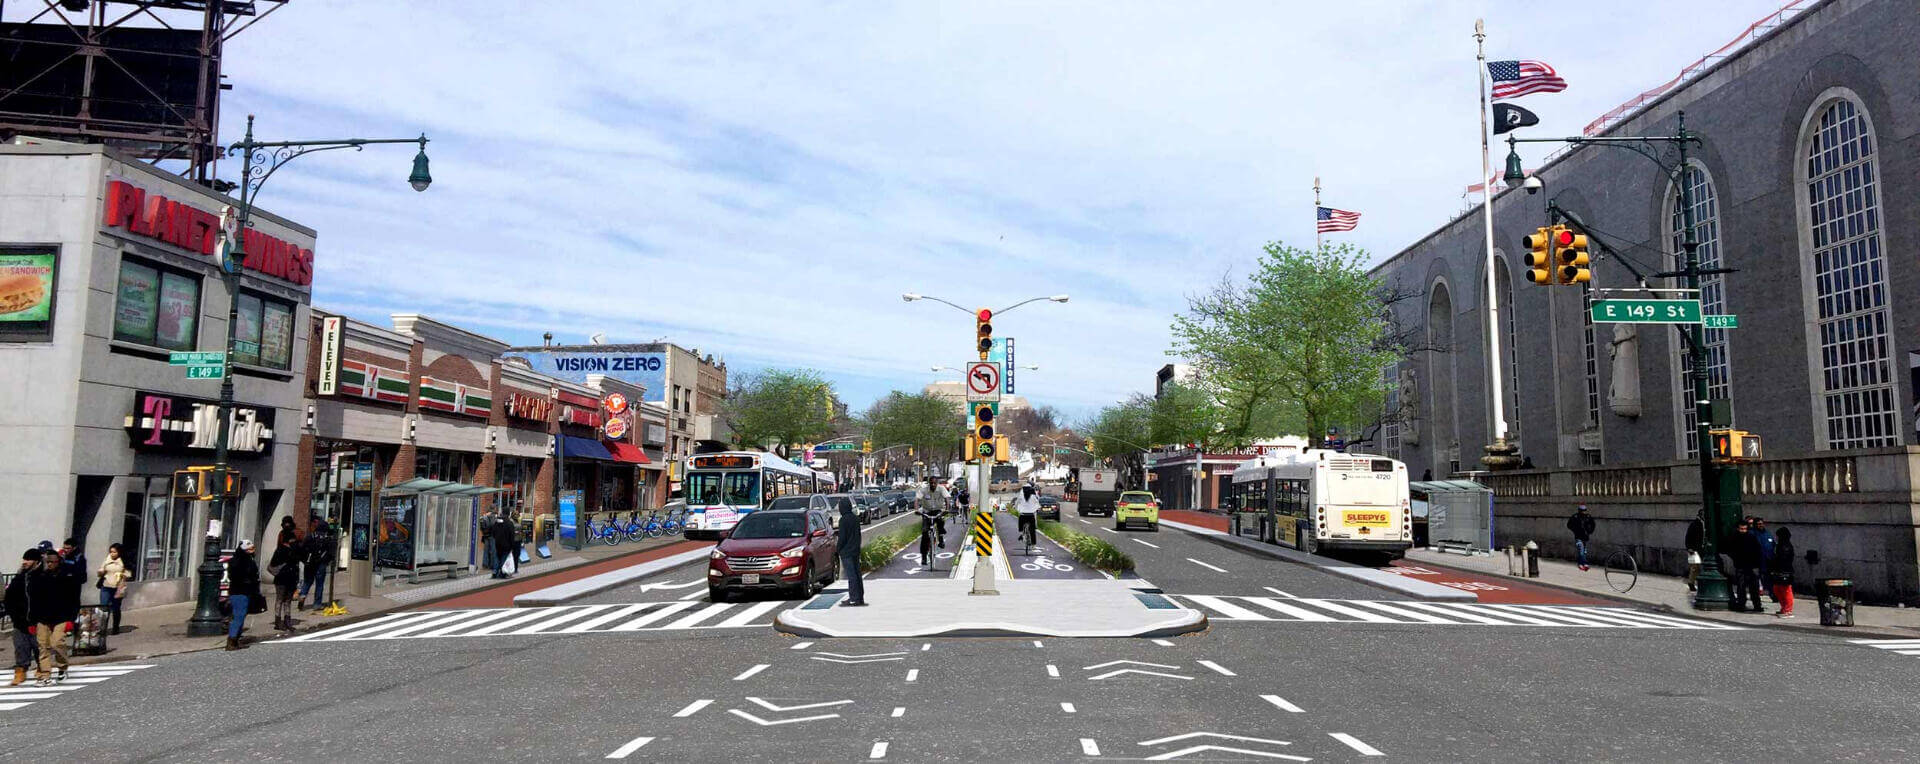 Rendering of a transformed Grand Concourse at East 149th street in the Bronx with protected bus lanes in both directions, ample lanes for cars, and two bike lanes in the middle, protected by bioswales.